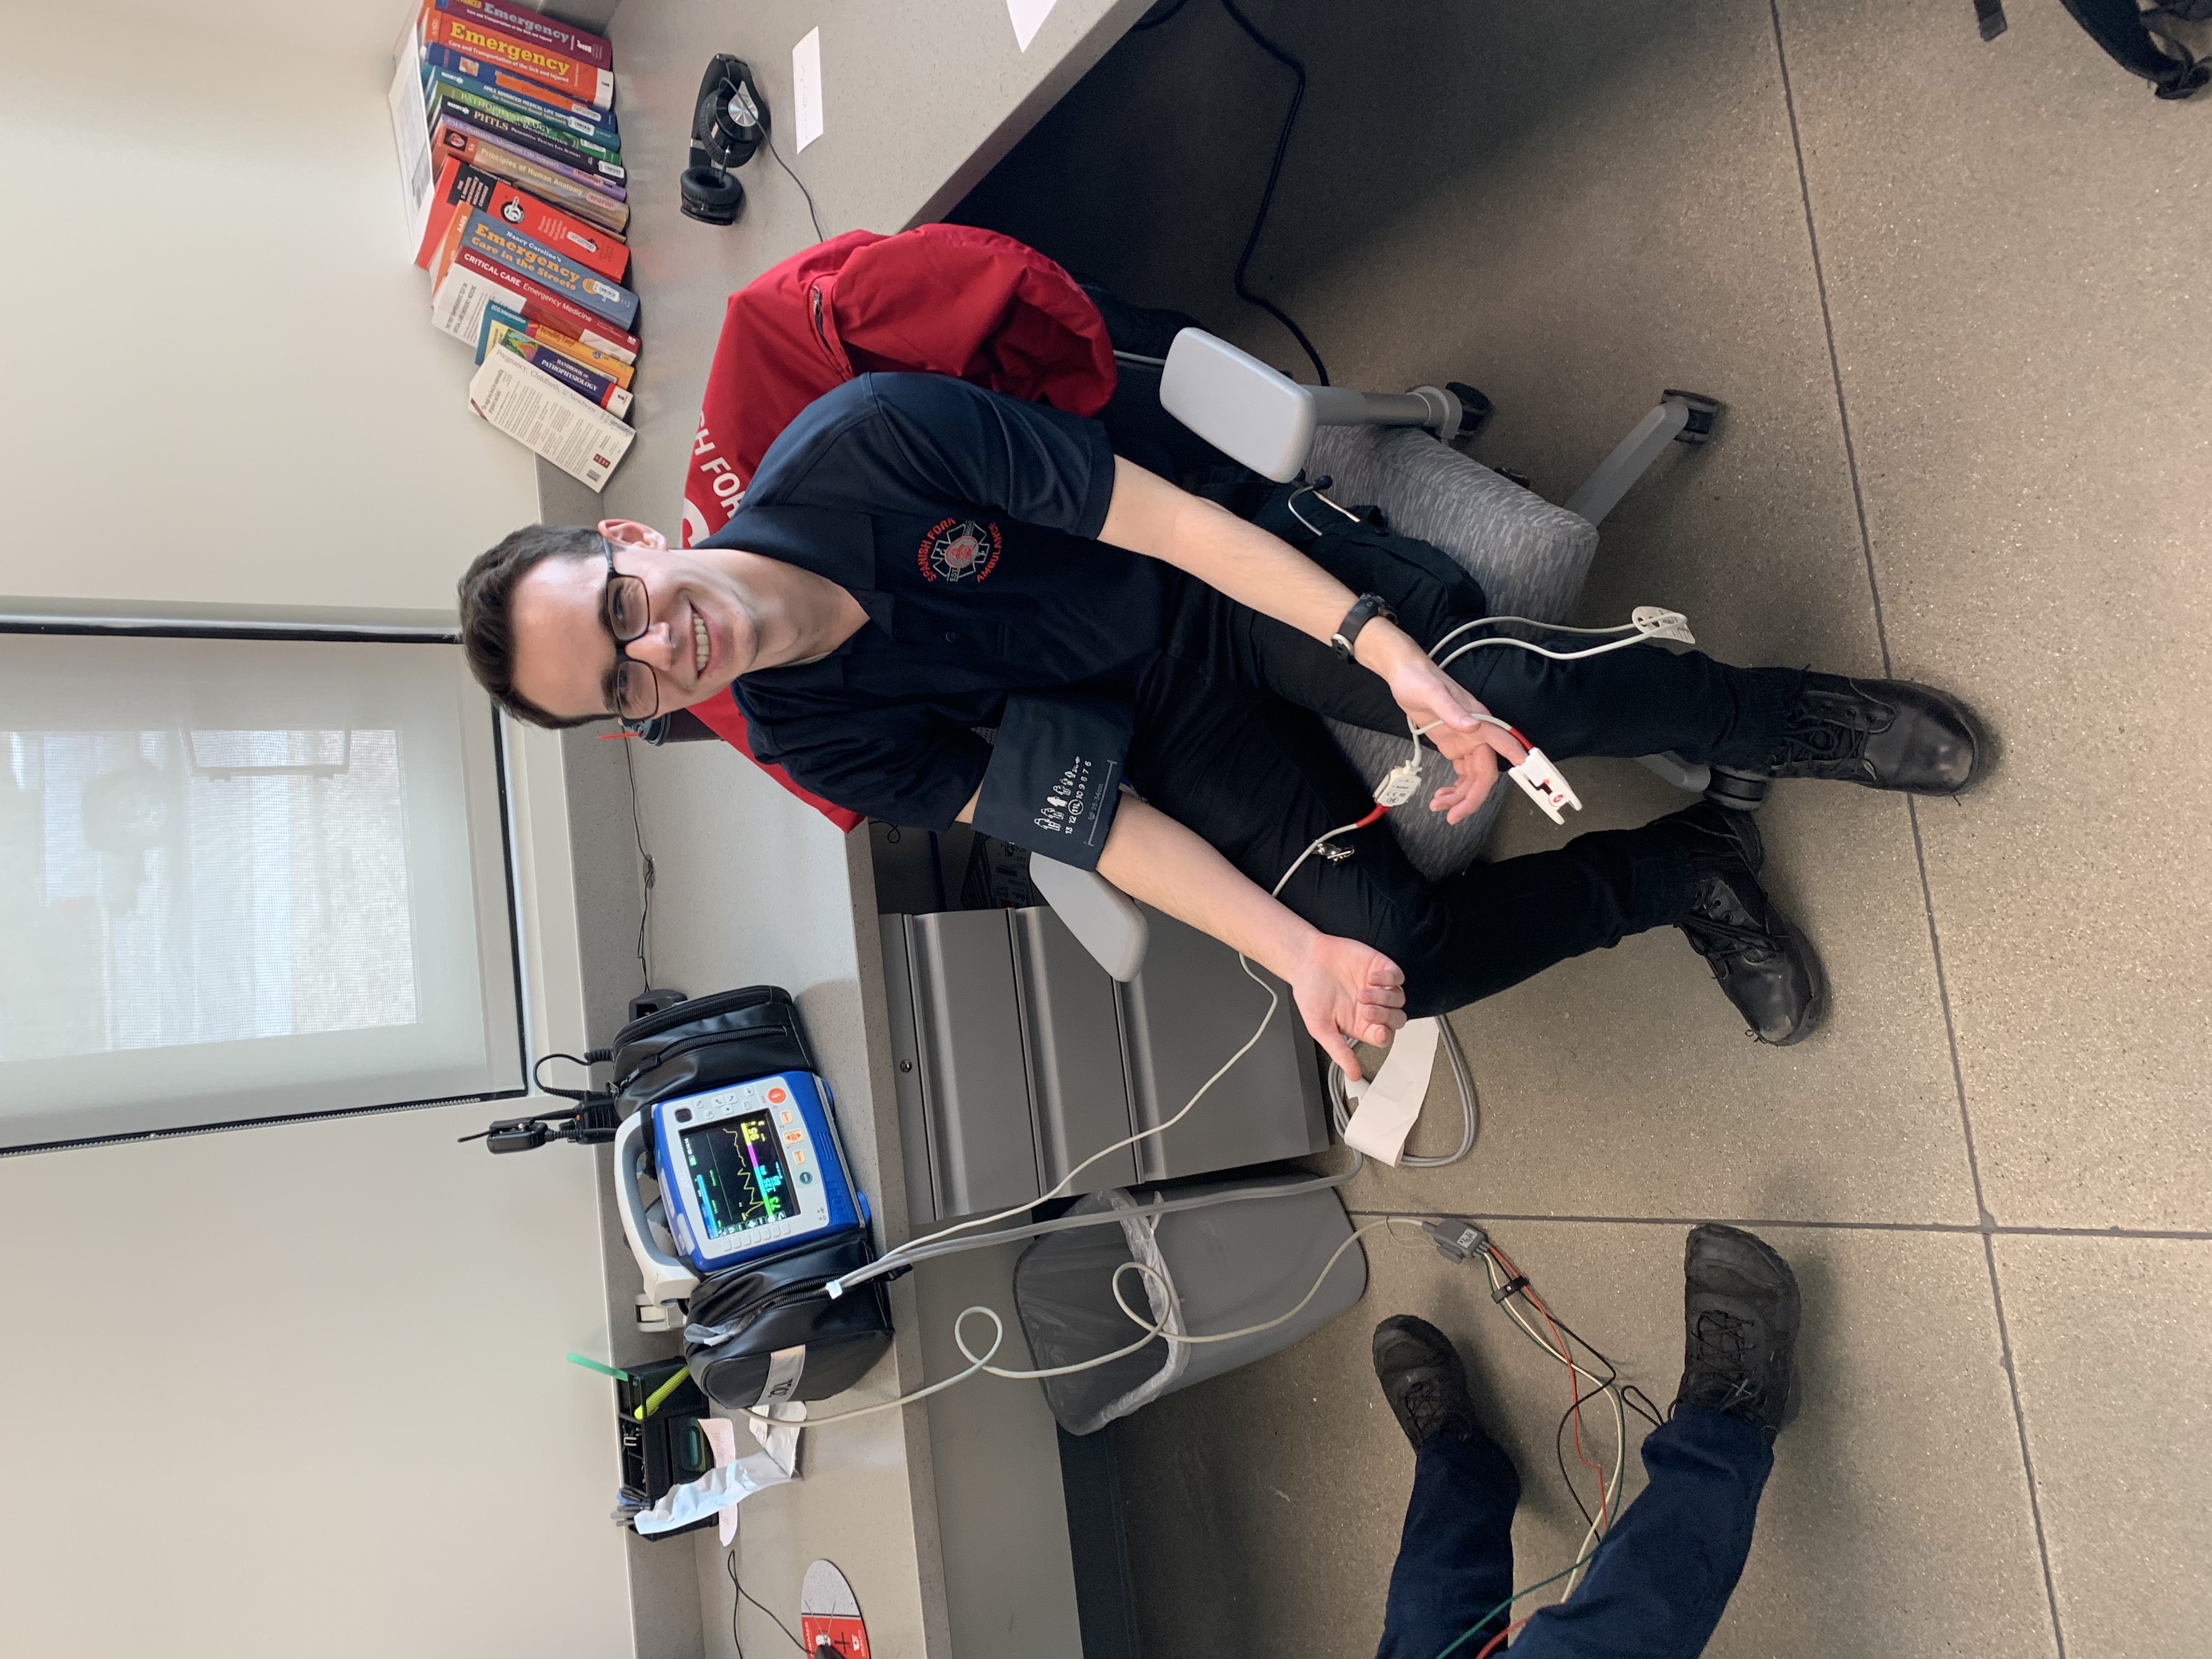 EMT Tate hooked up to the Zoll machine as a demonstration of what the technology can do to monitor heart rate and blood pressure. 